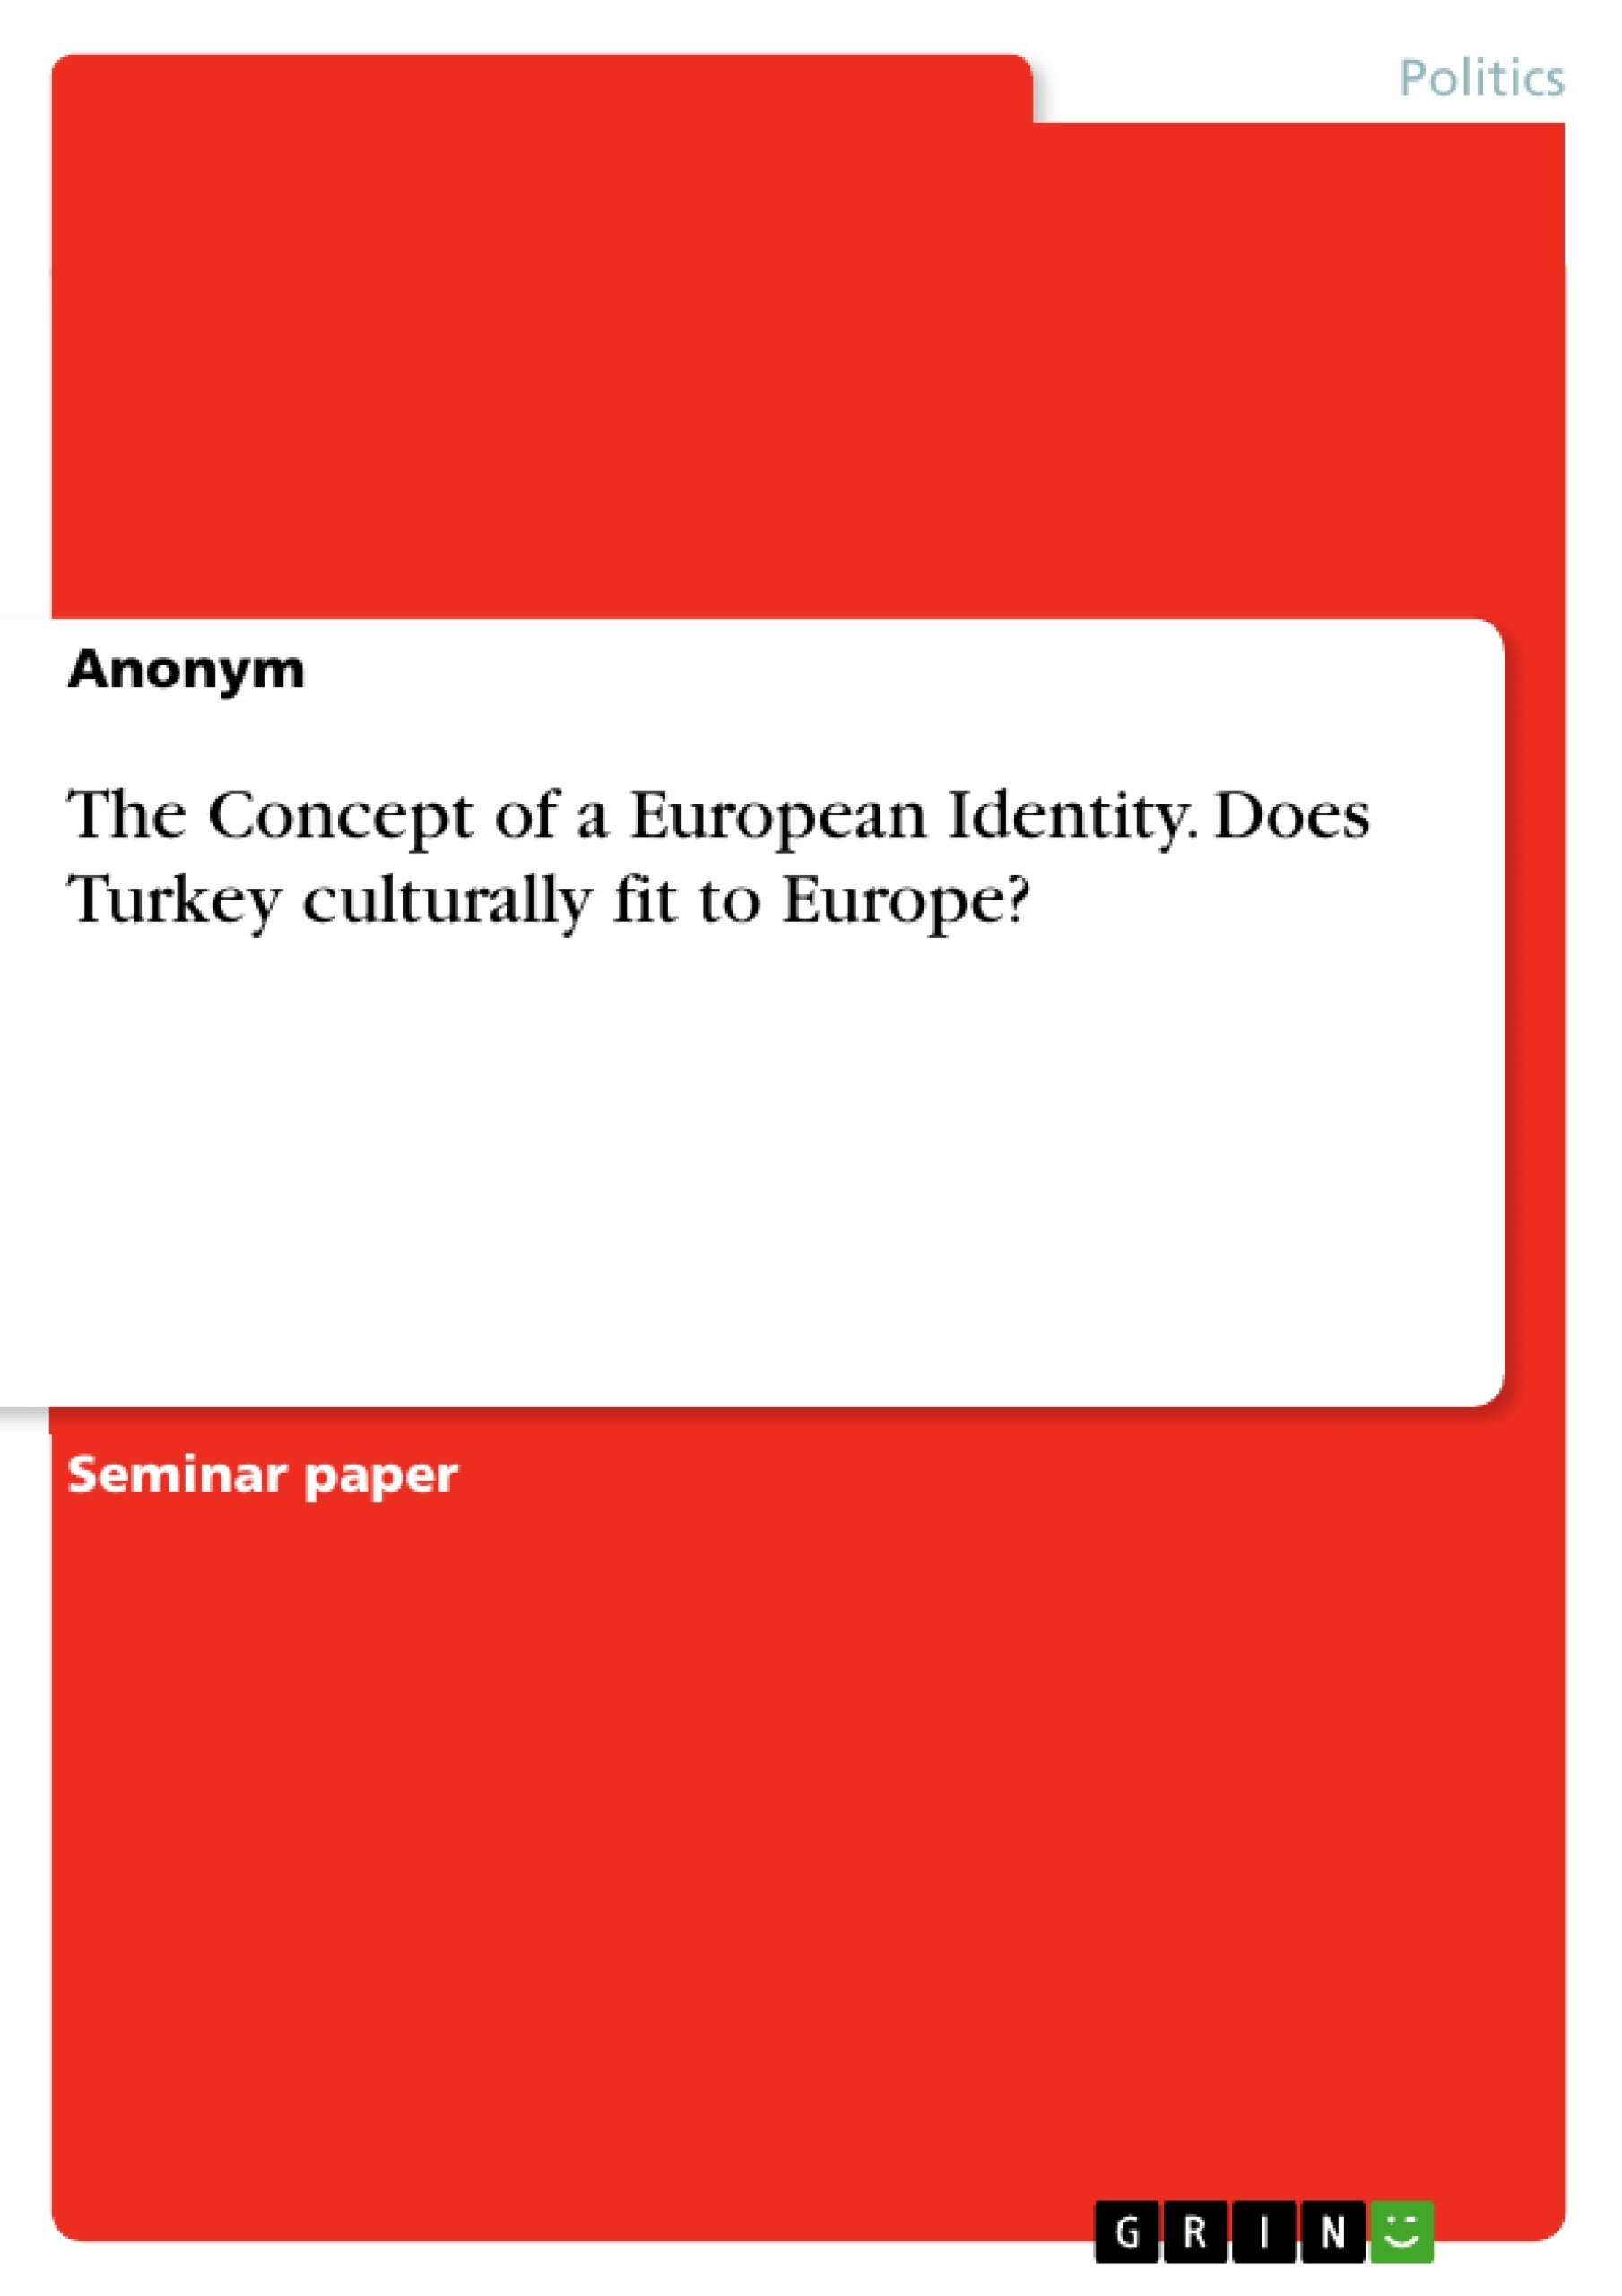 Title: The Concept of a European Identity. Does Turkey culturally fit to Europe?